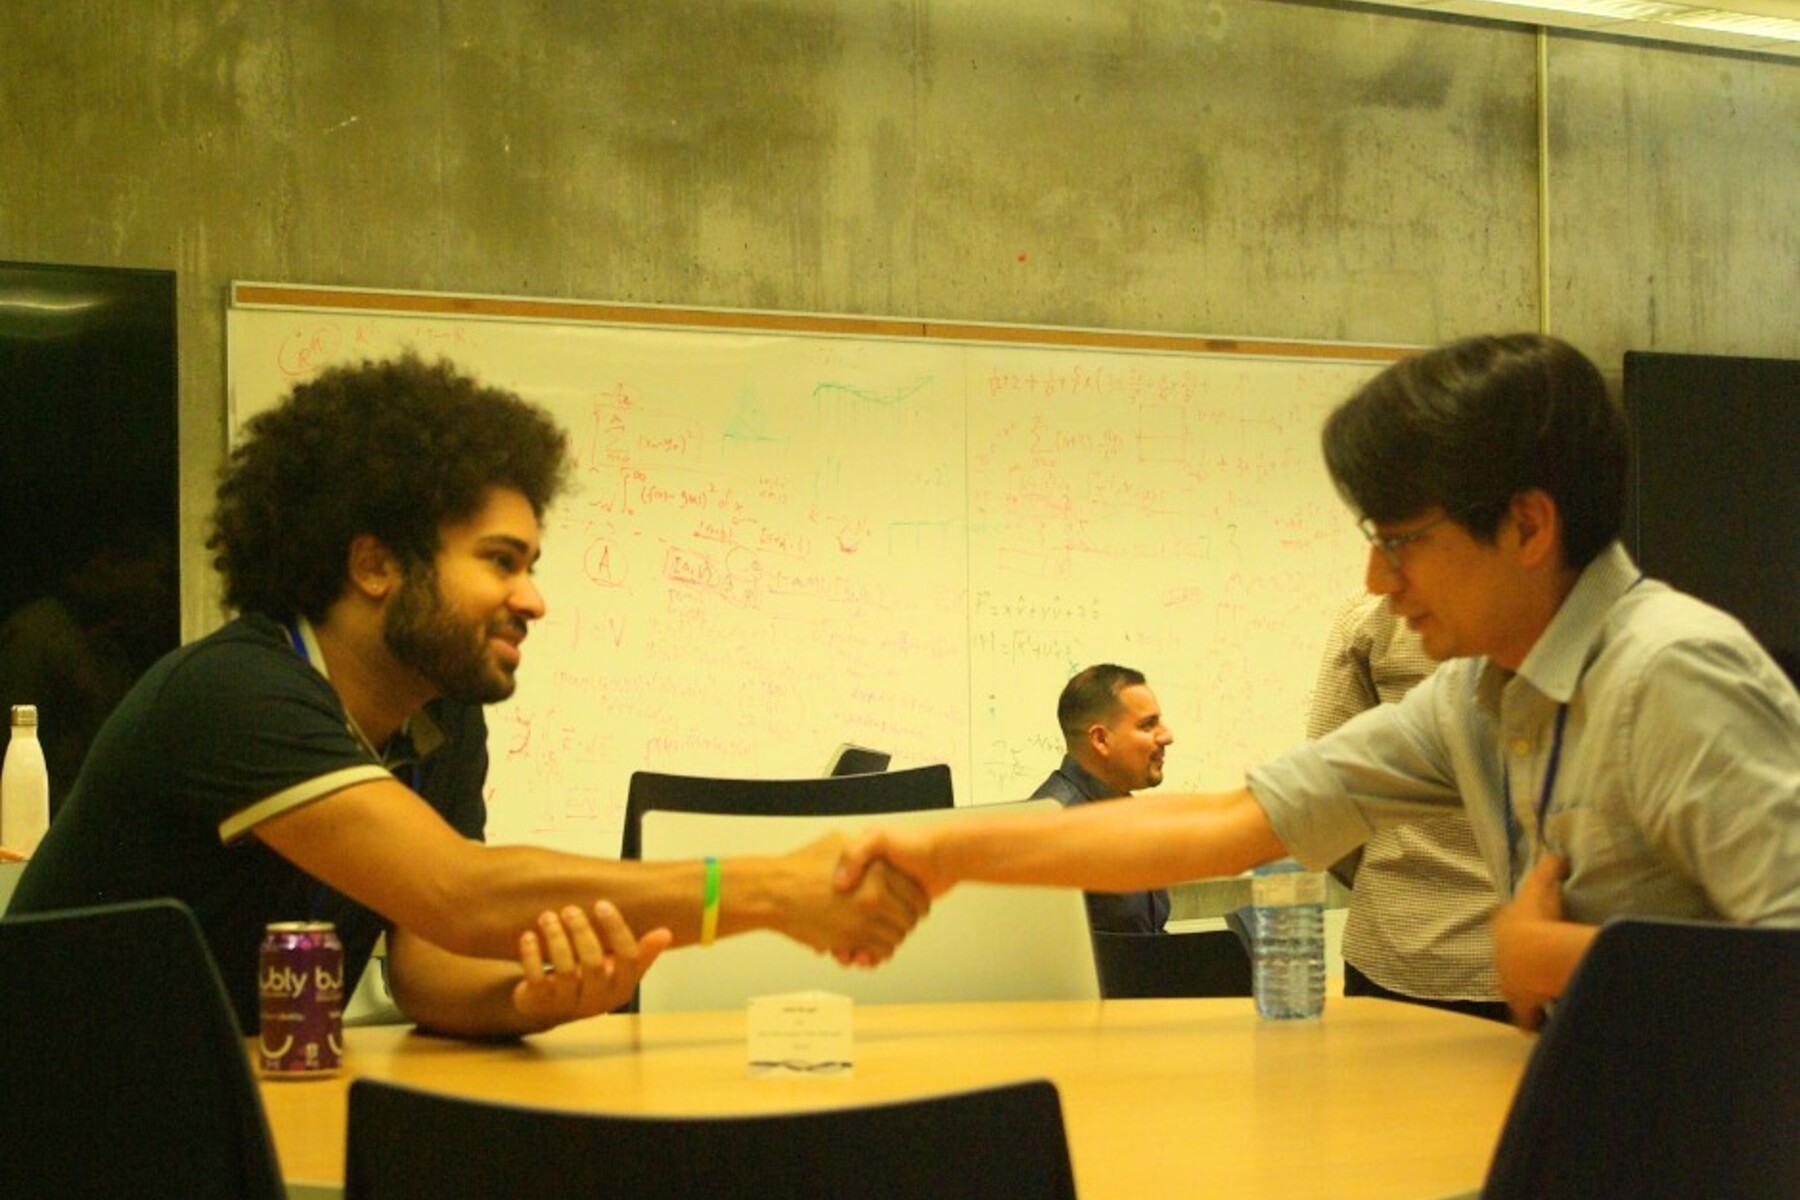 two people shake hands across a table